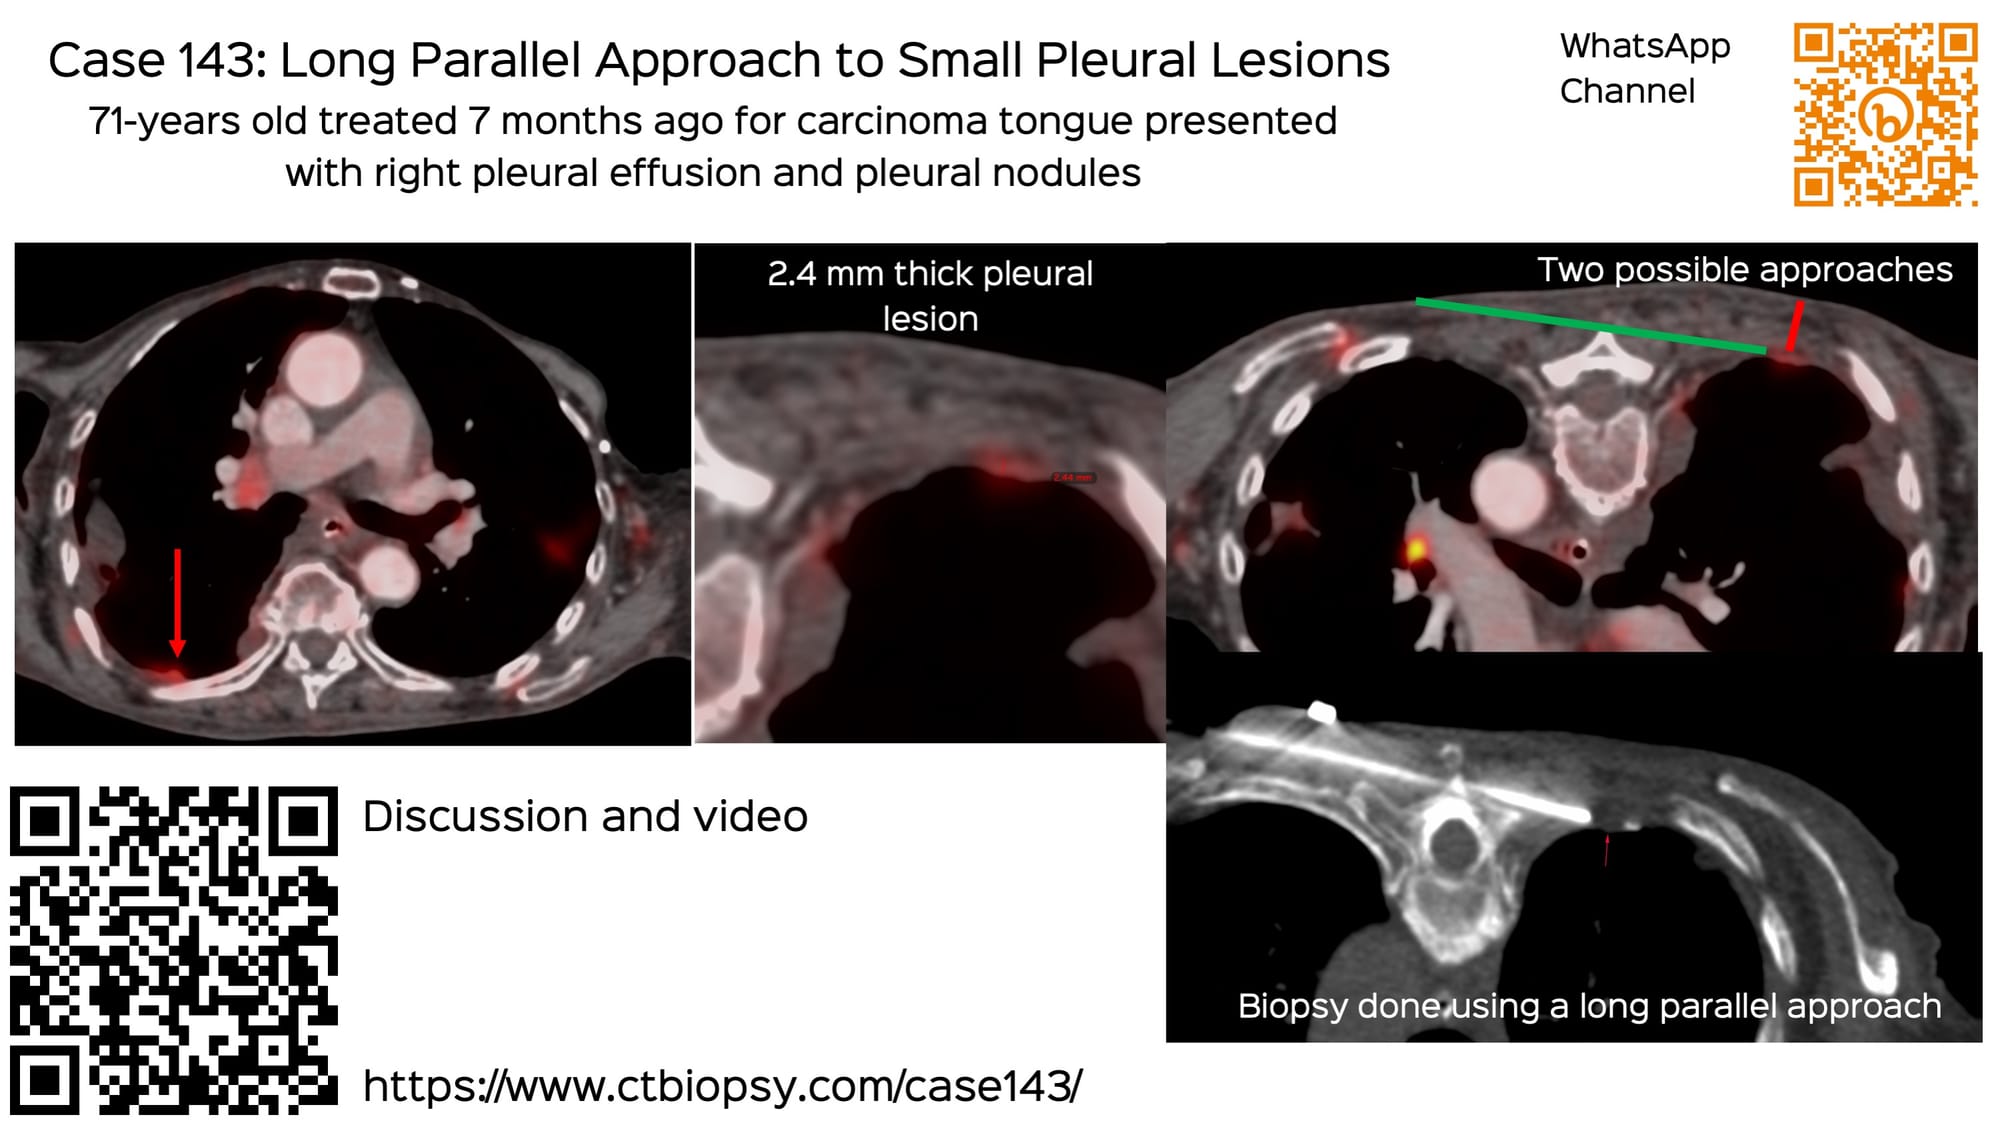 Case 143: Long Parallel Approach to Small Pleural Lesions